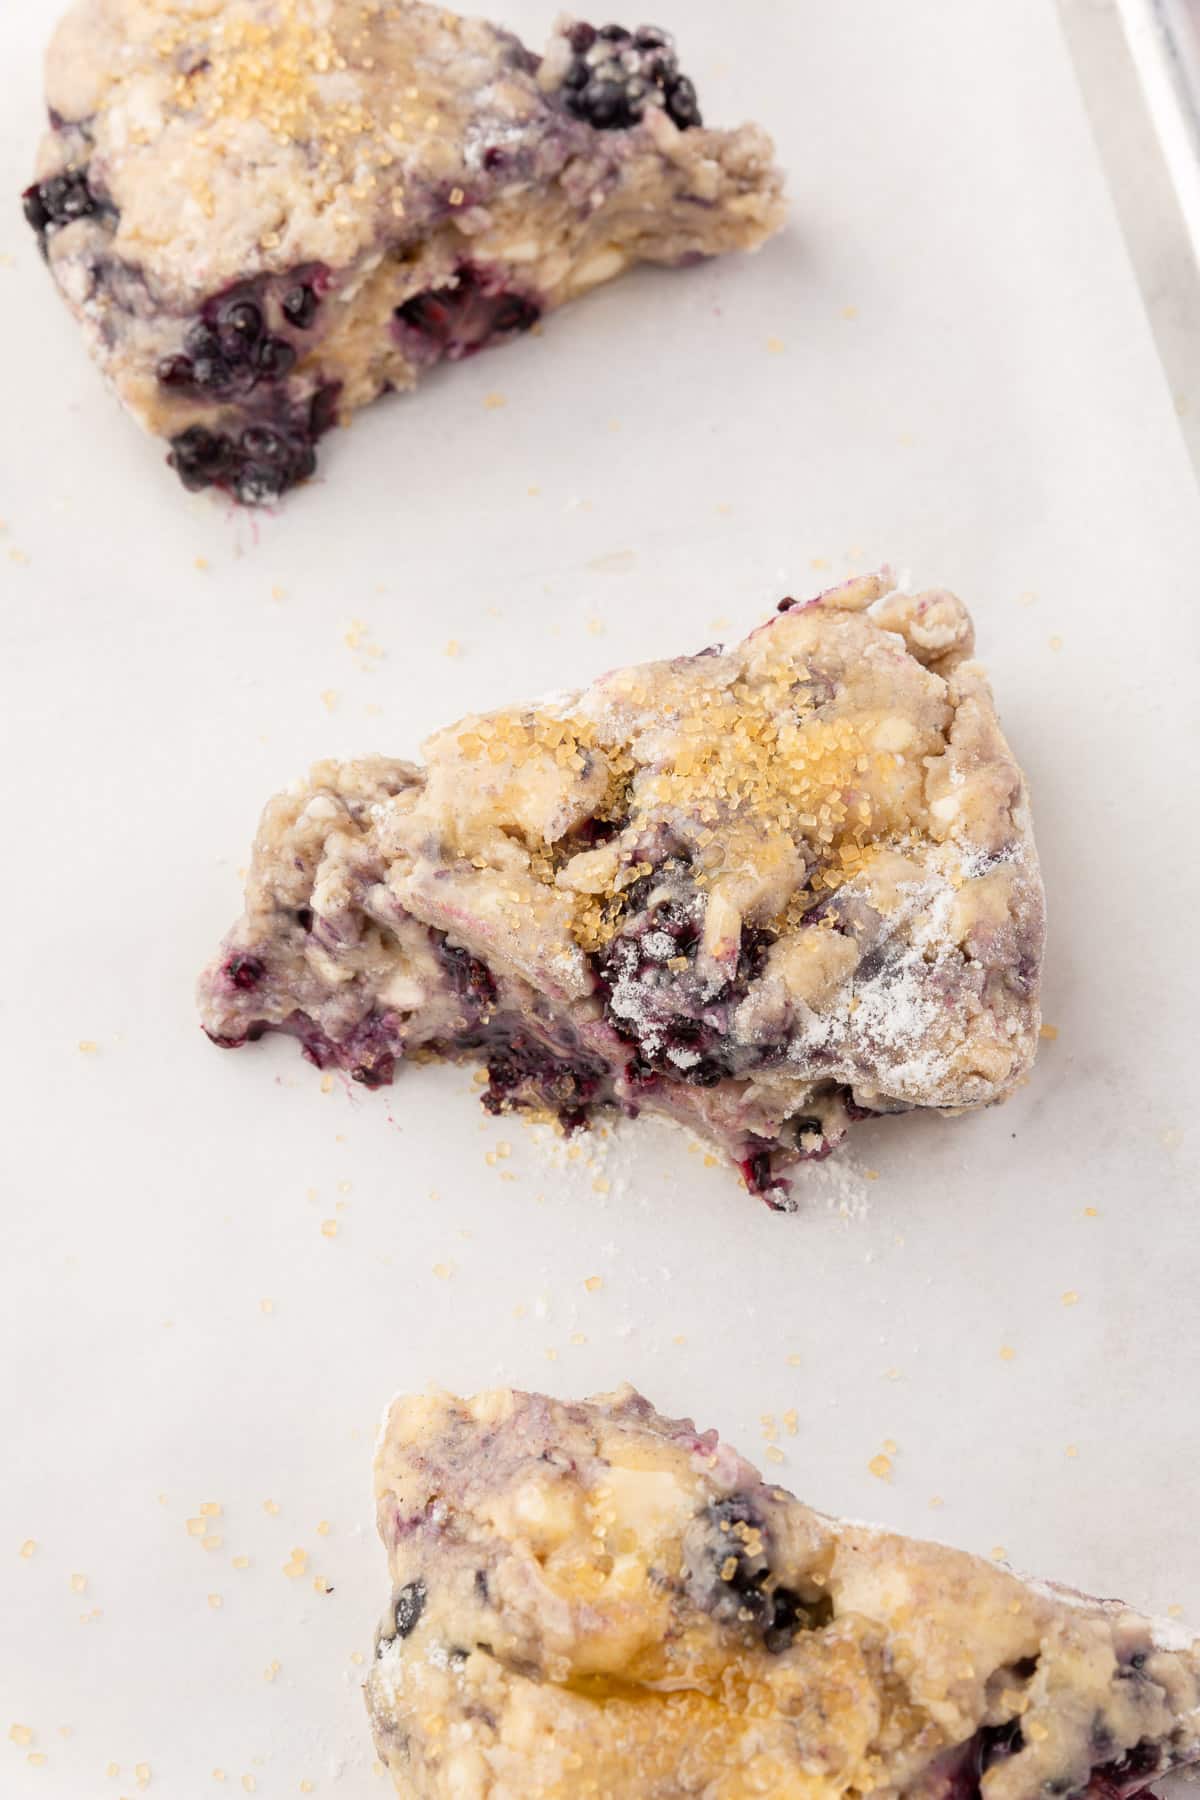 A close up of wedges of gluten free blackberry scone dough on a parchment paper lined baking sheet.